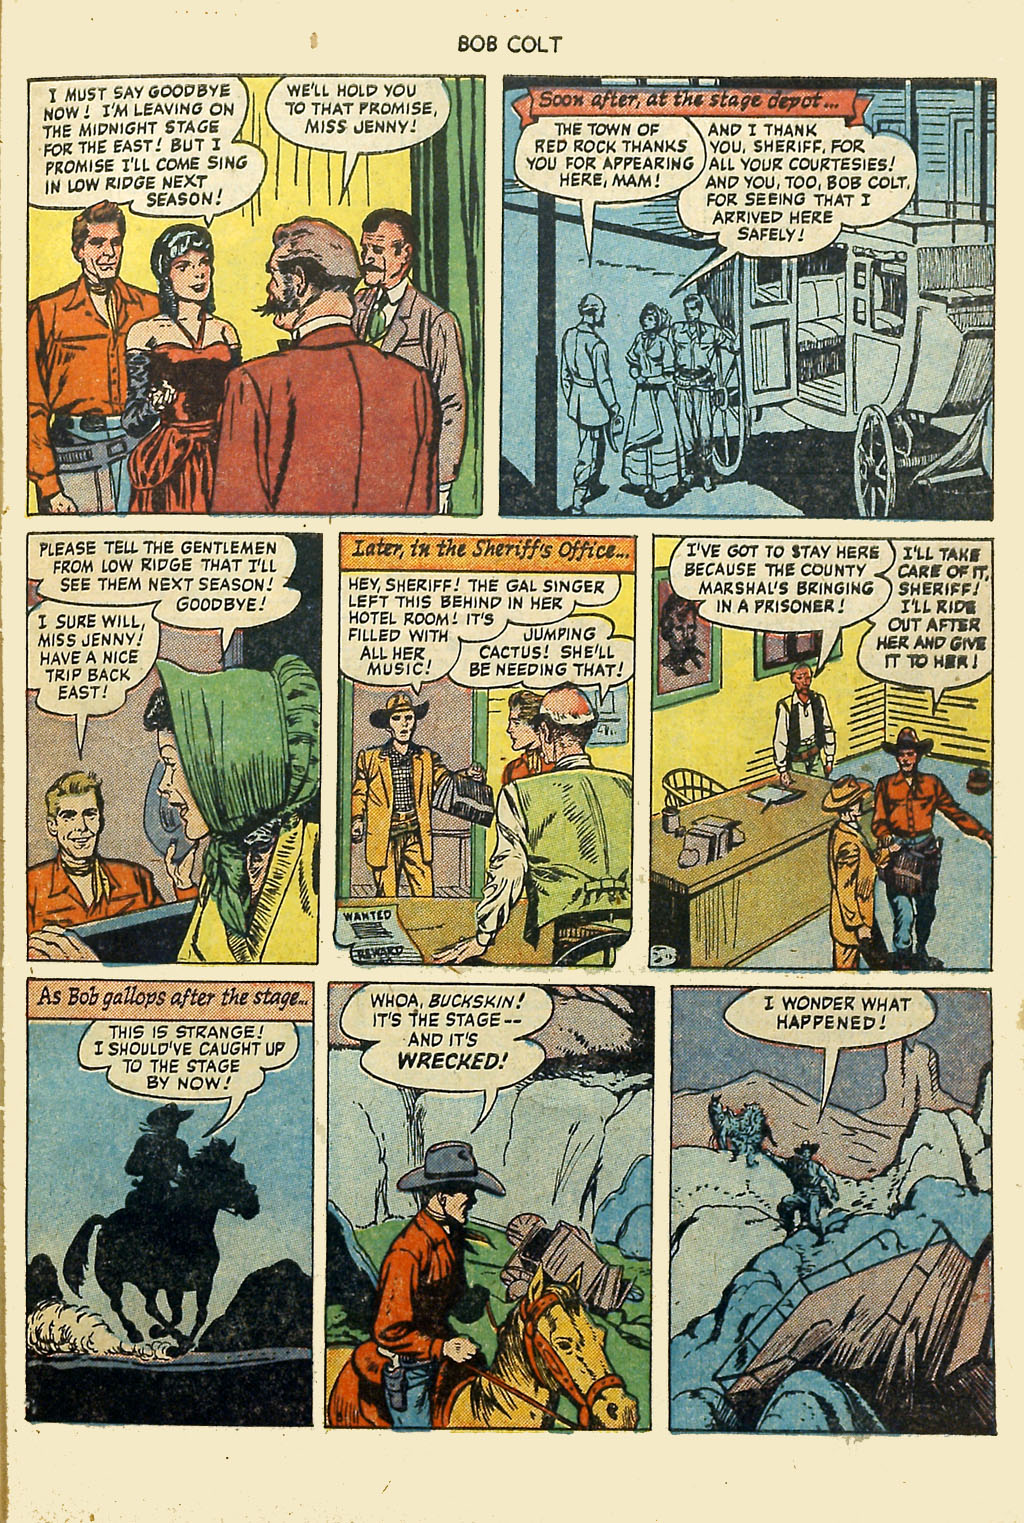 Read online Bob Colt Western comic -  Issue #2 - 31